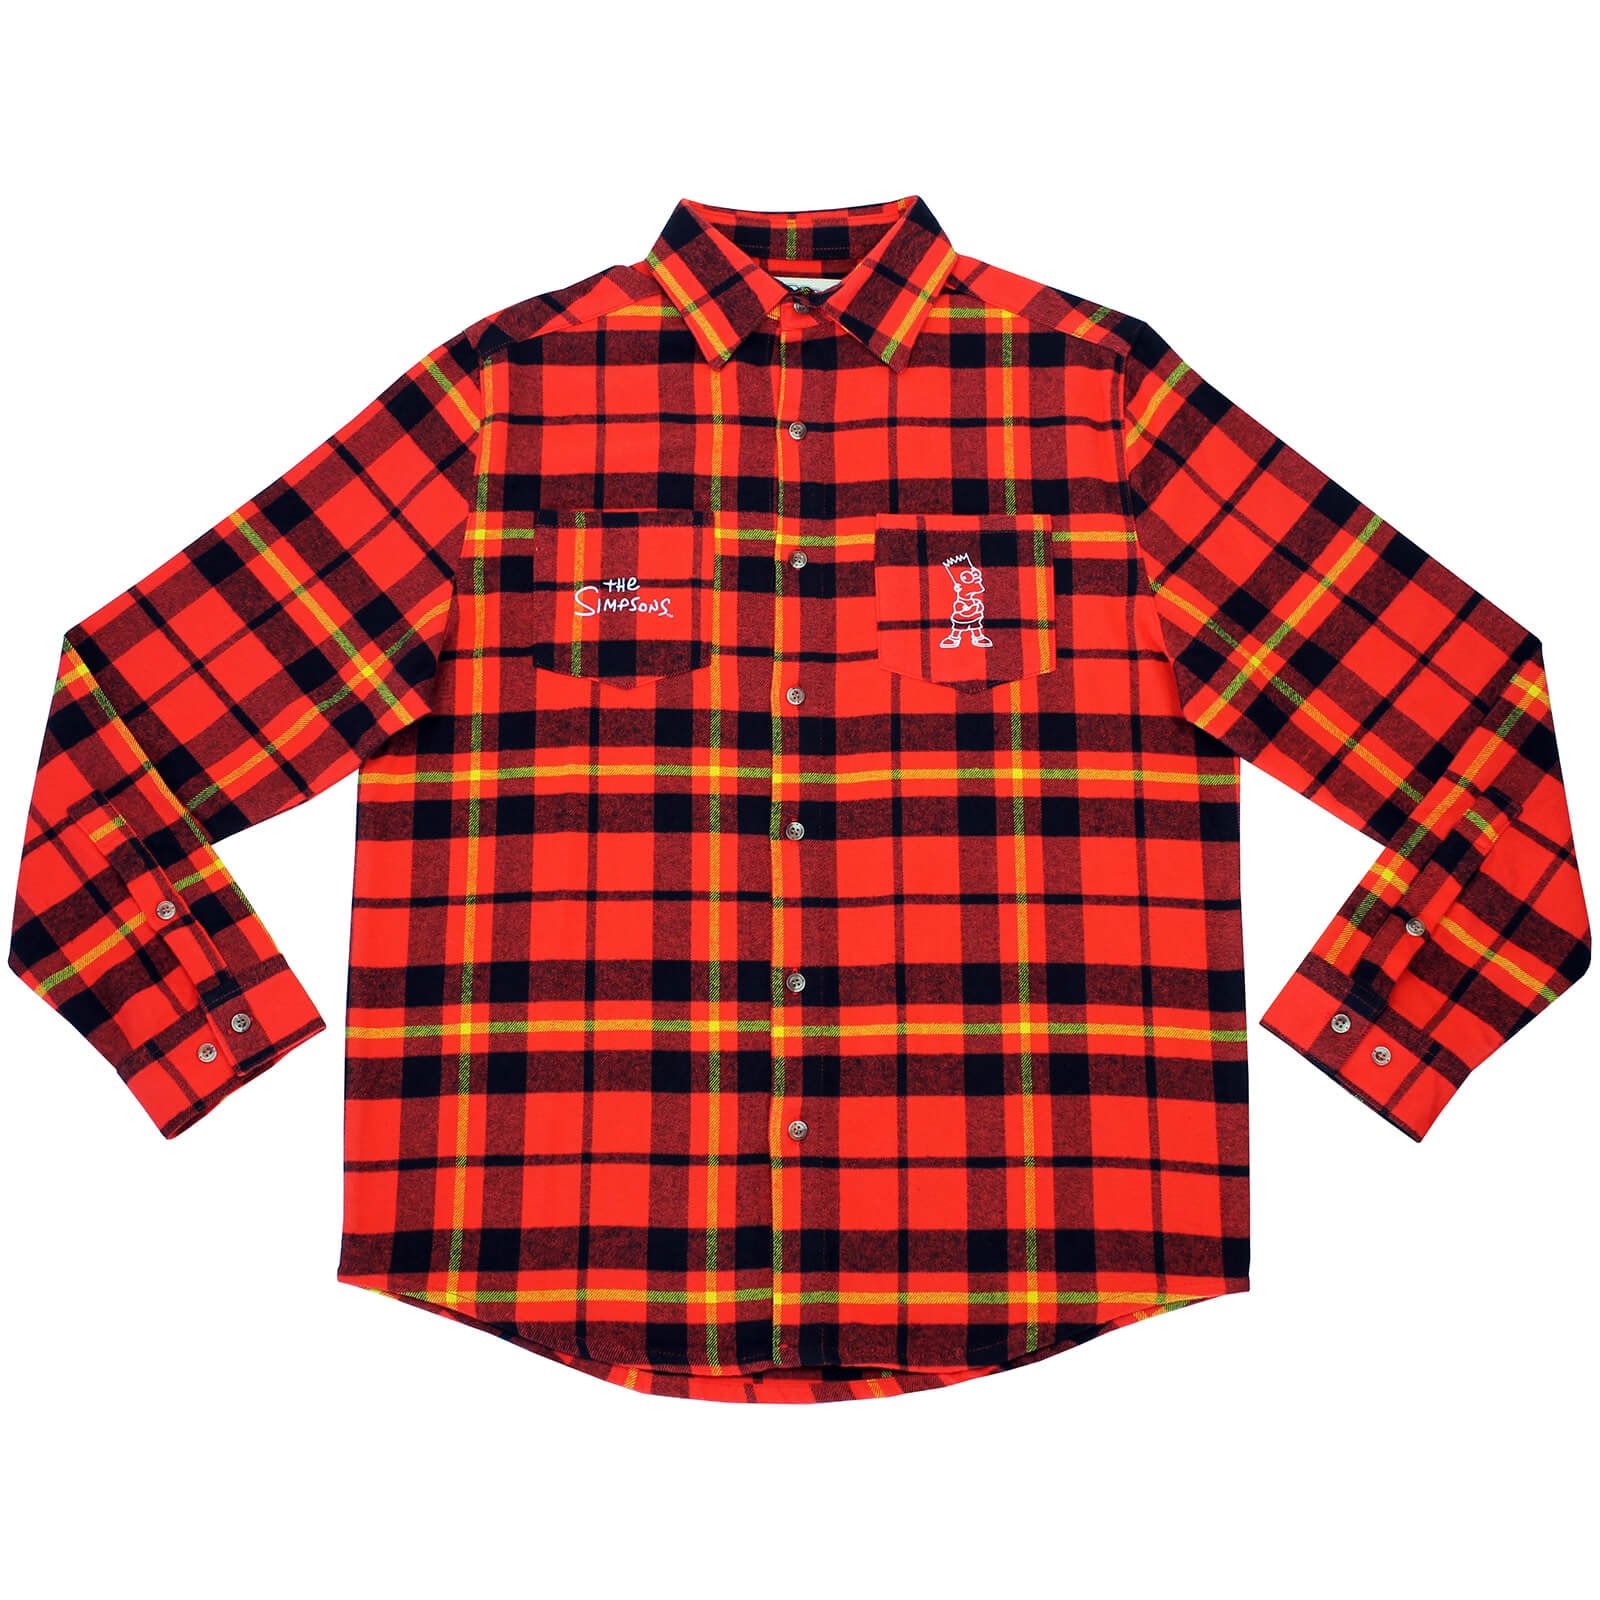 Cakeworthy x The Simpsons - Bart Simpson Flannel Shirt - S